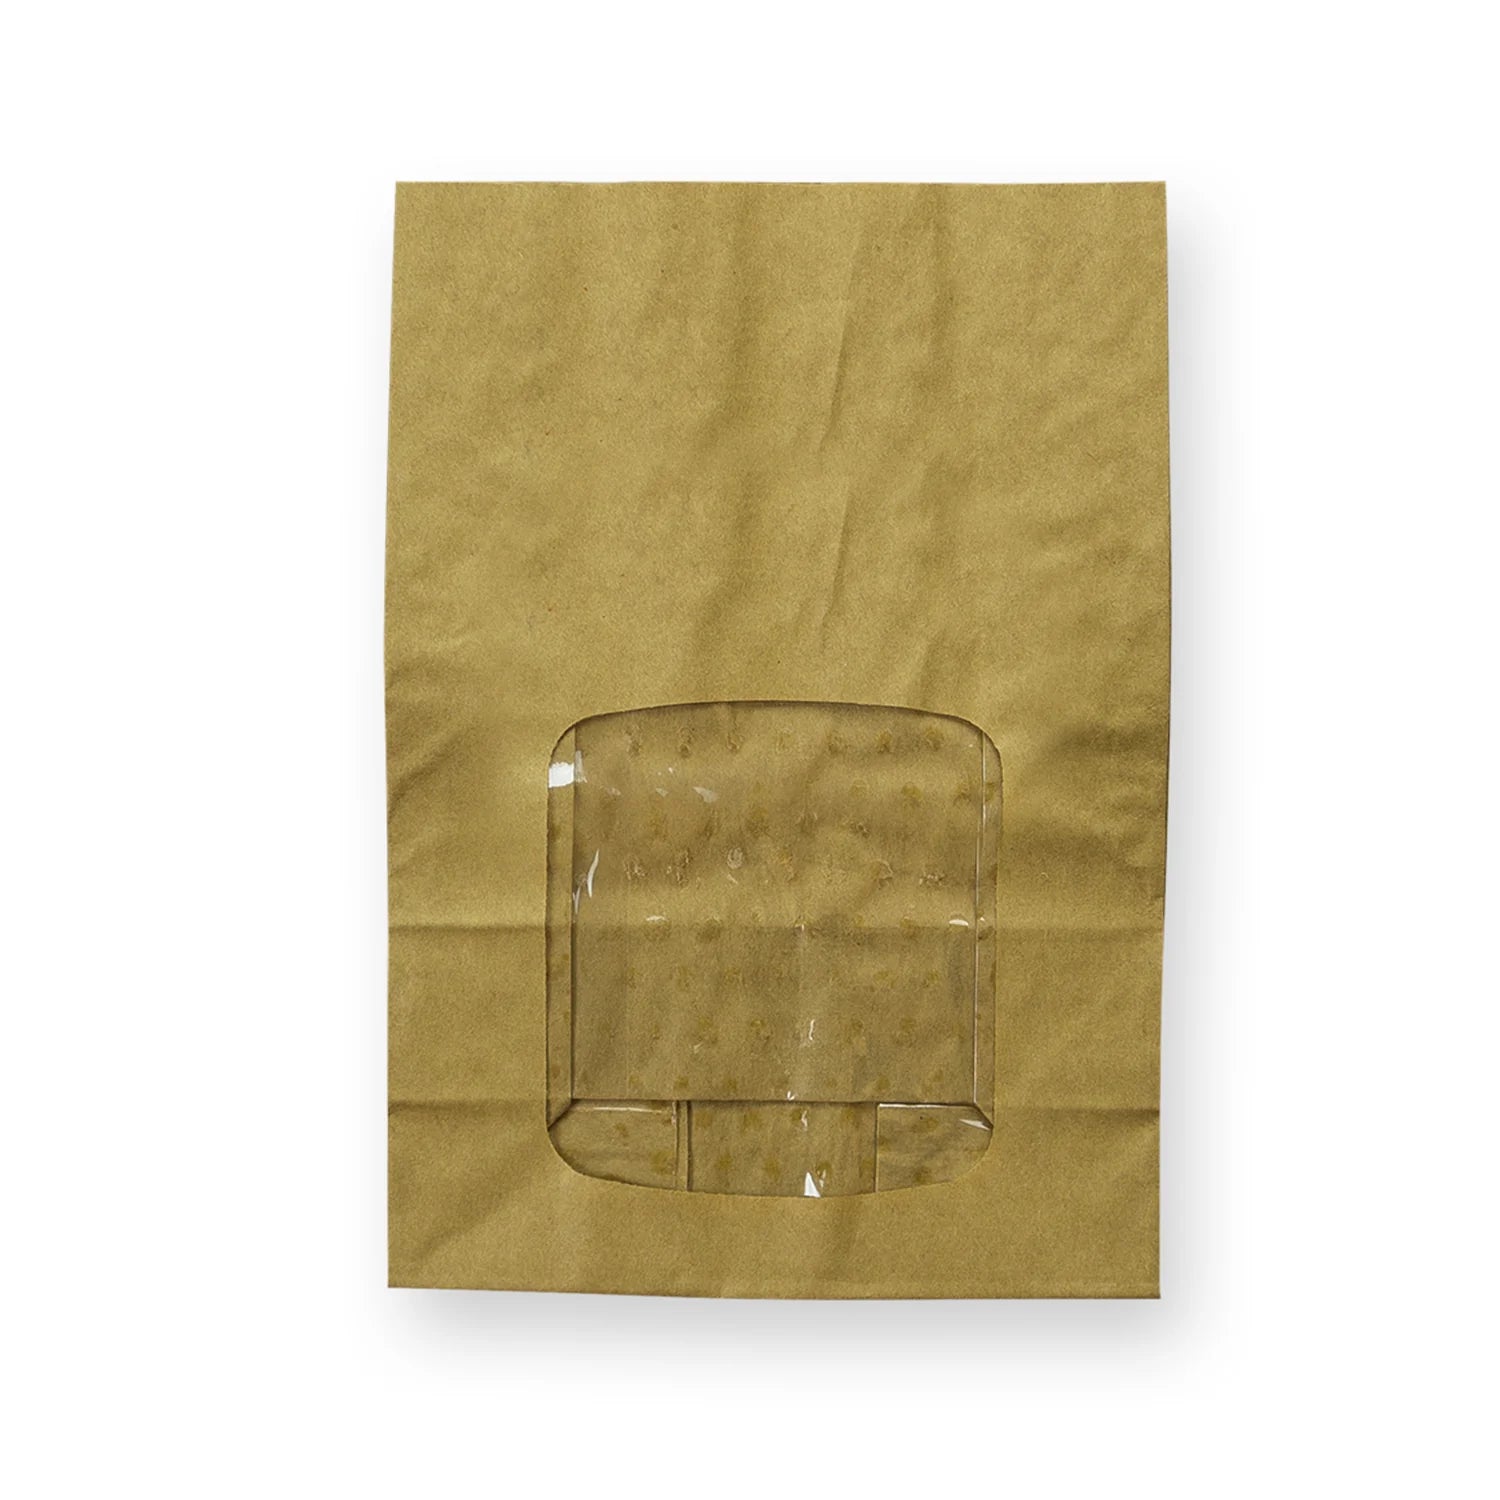 Vegware™ compostable kraft Window Bloomer Bags feature 100% recycled paper fully lined with Natureflex grease-proof film from wood pulp.